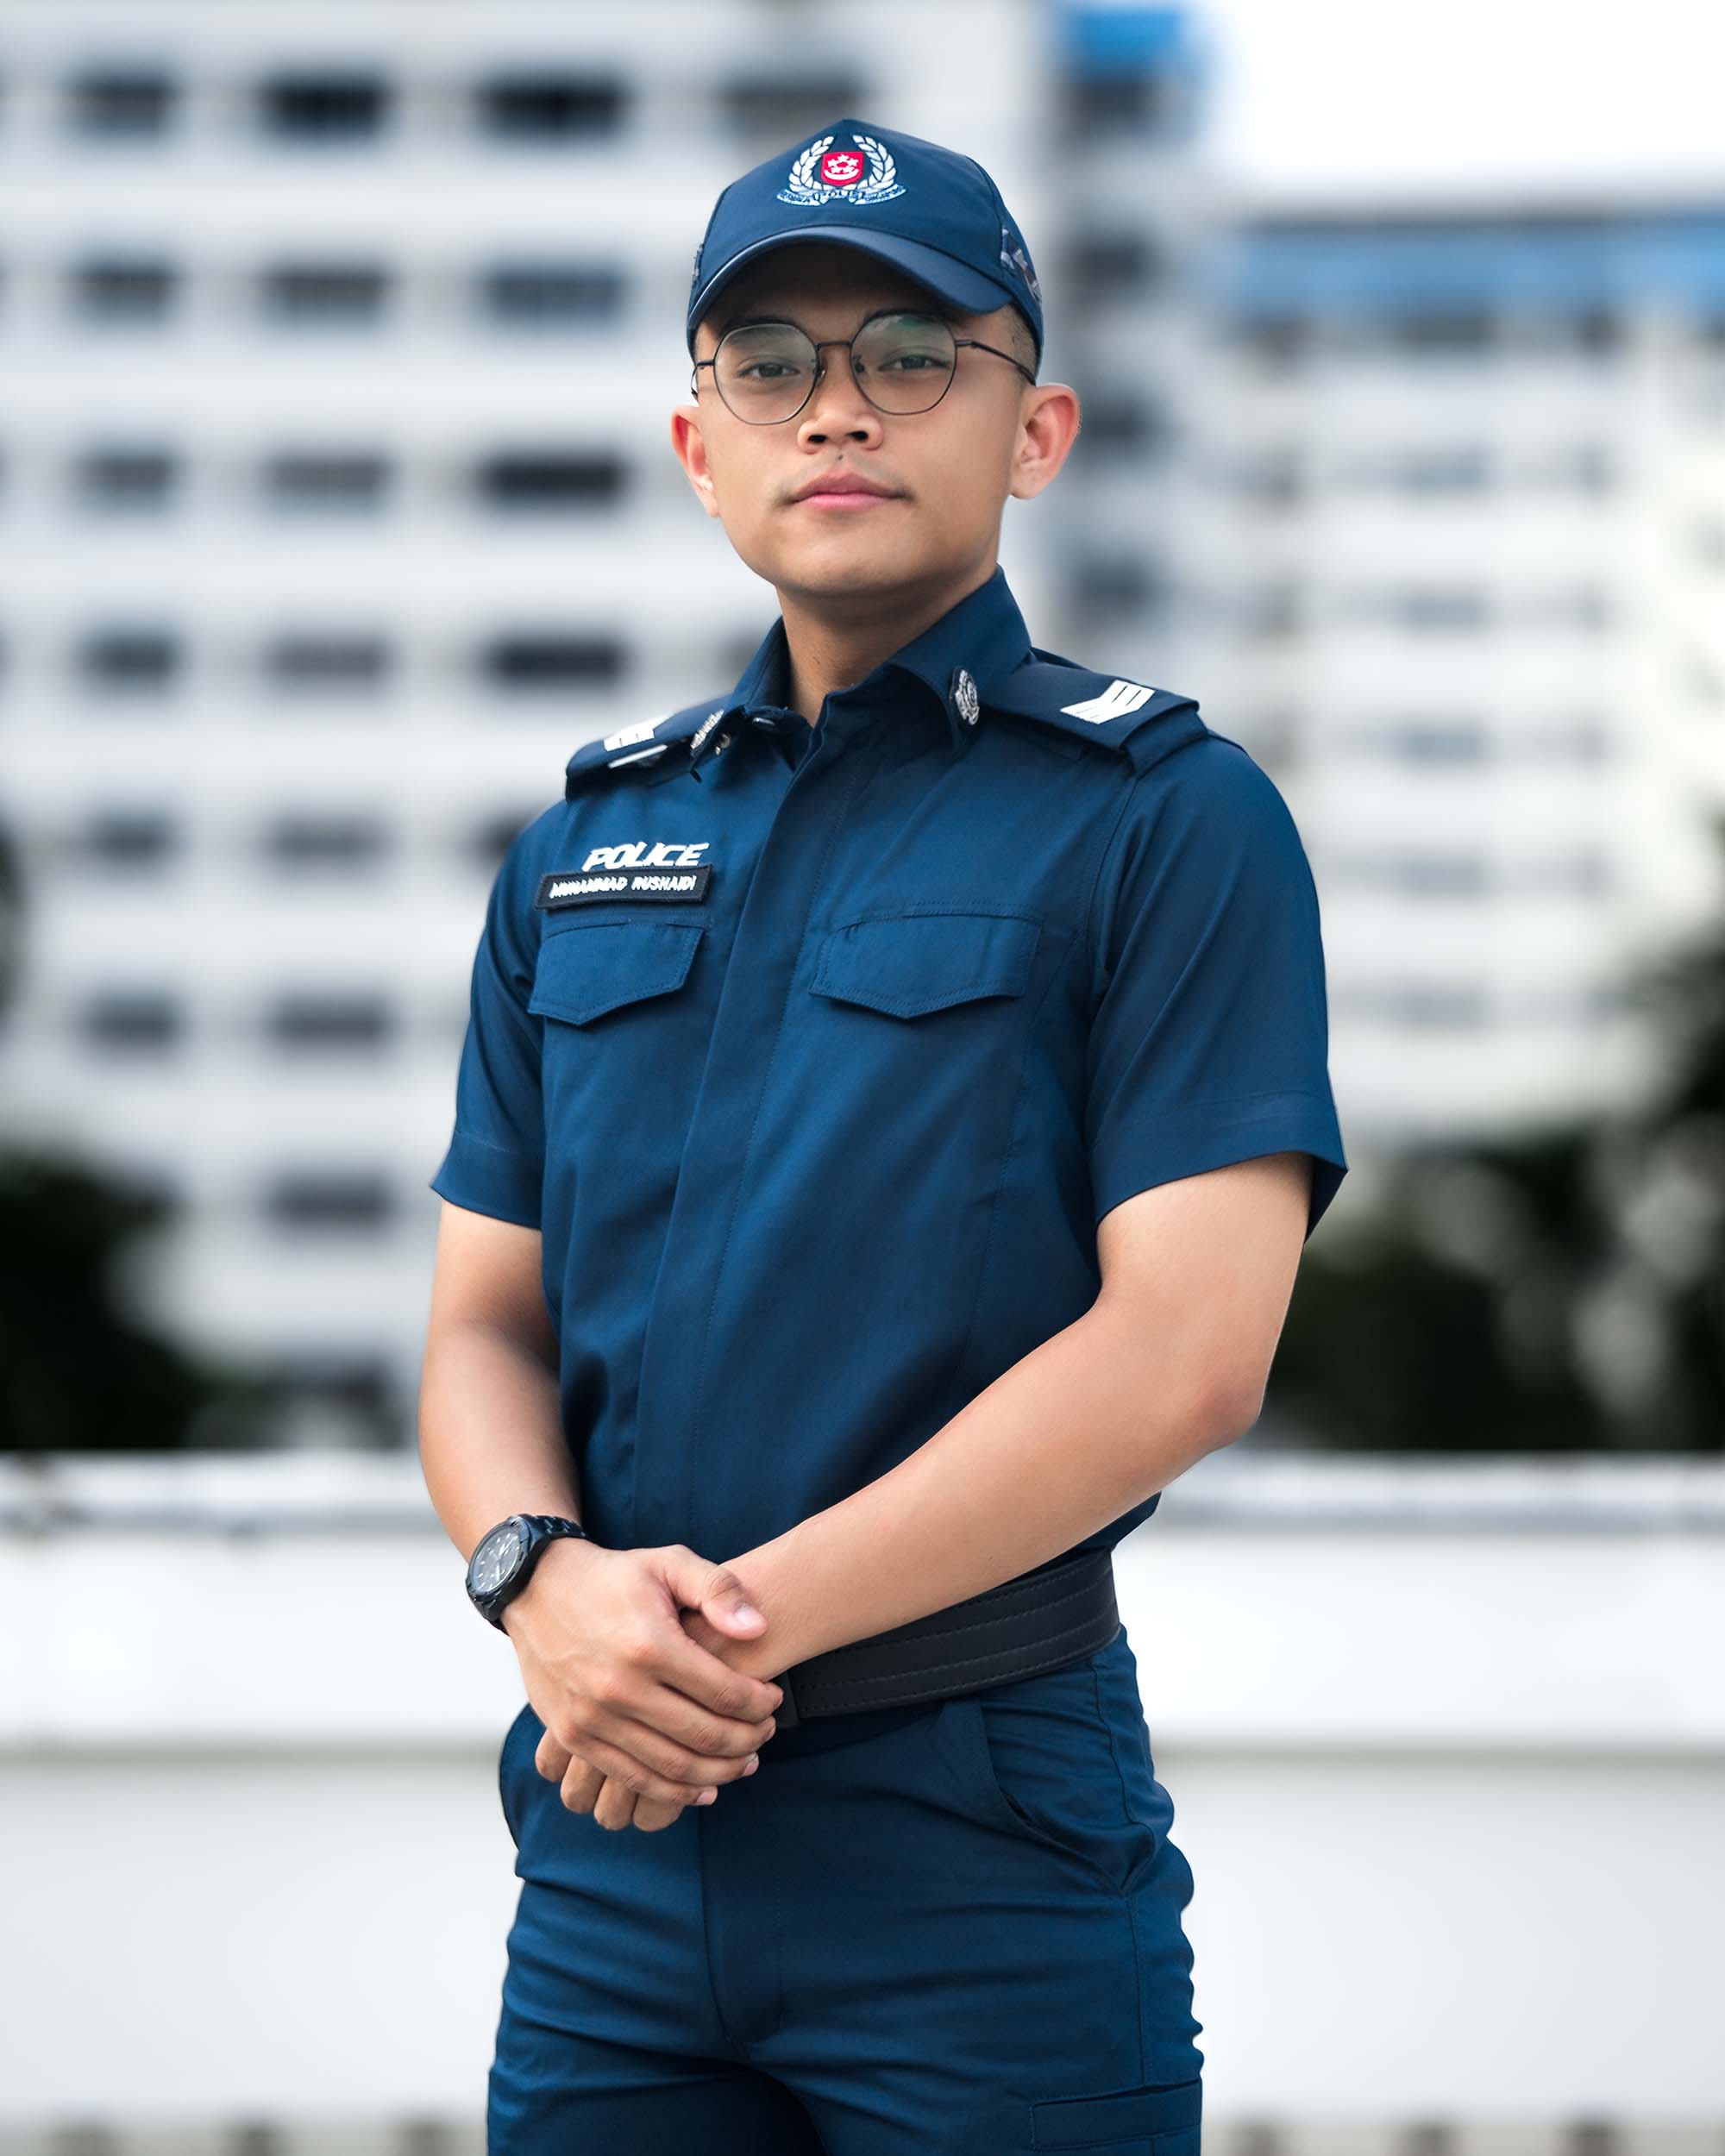 Sgt Rushaidi is currently a GRF officer with Pasir Ris NPC.